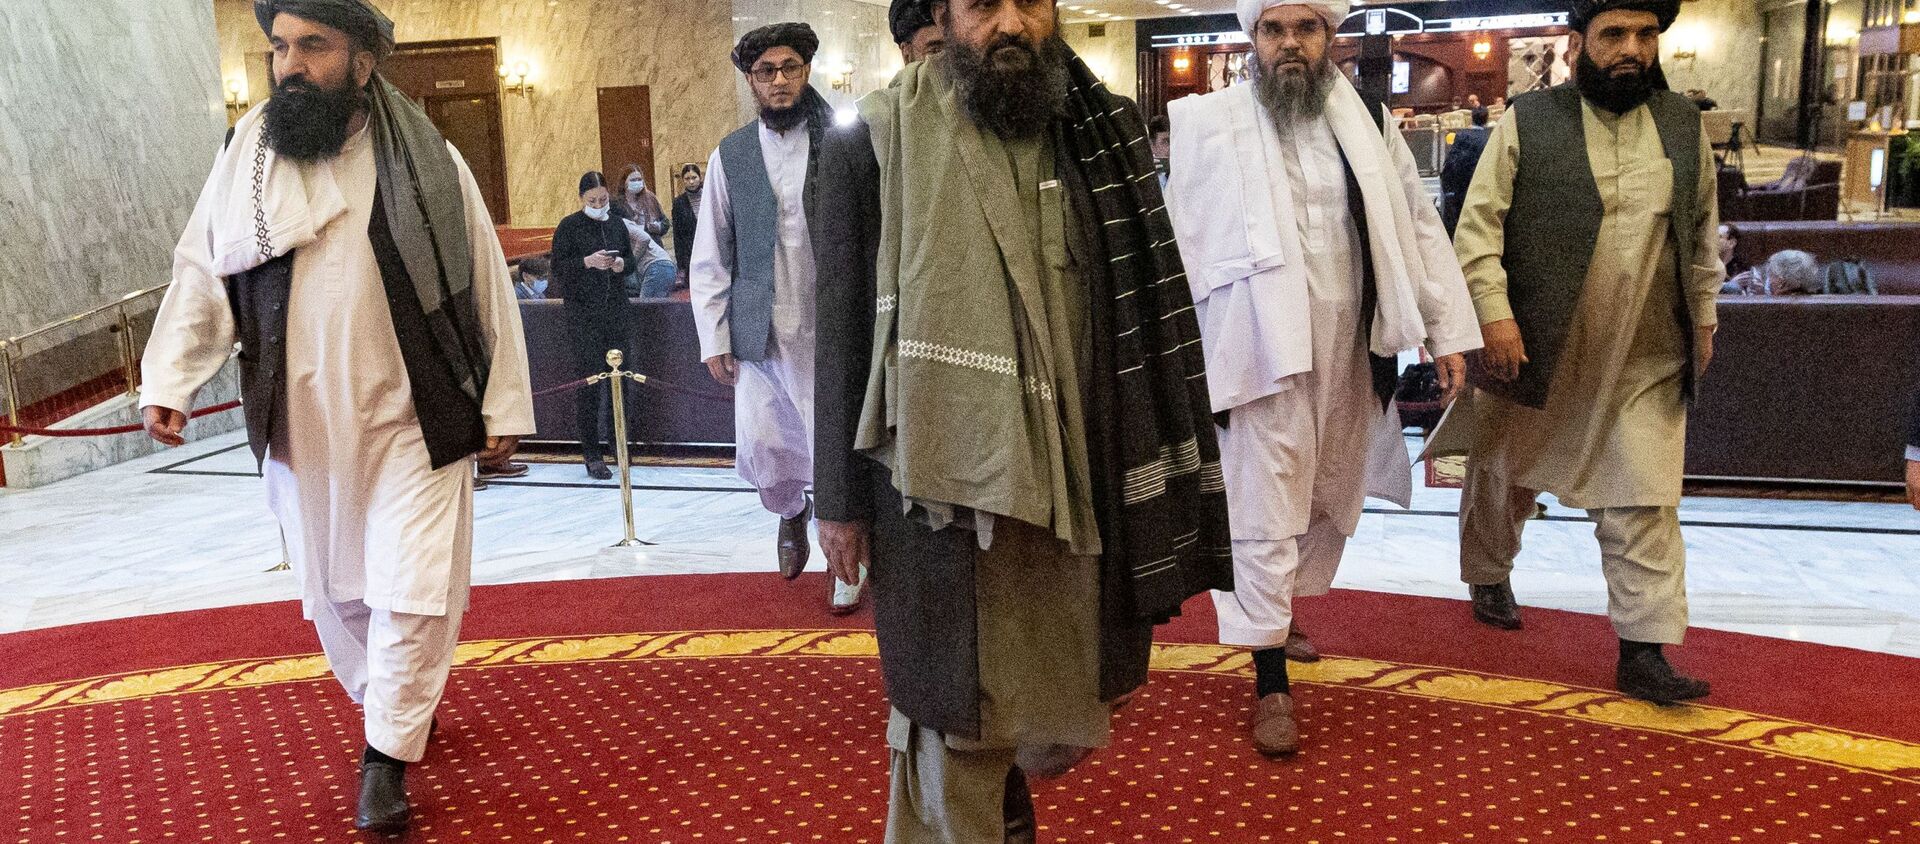 Mullah Abdul Ghani Baradar, the Taliban's deputy leader and negotiator, and other delegation members attend the Afghan peace conference in Moscow, Russia March 18, 2021. - Sputnik International, 1920, 14.04.2021